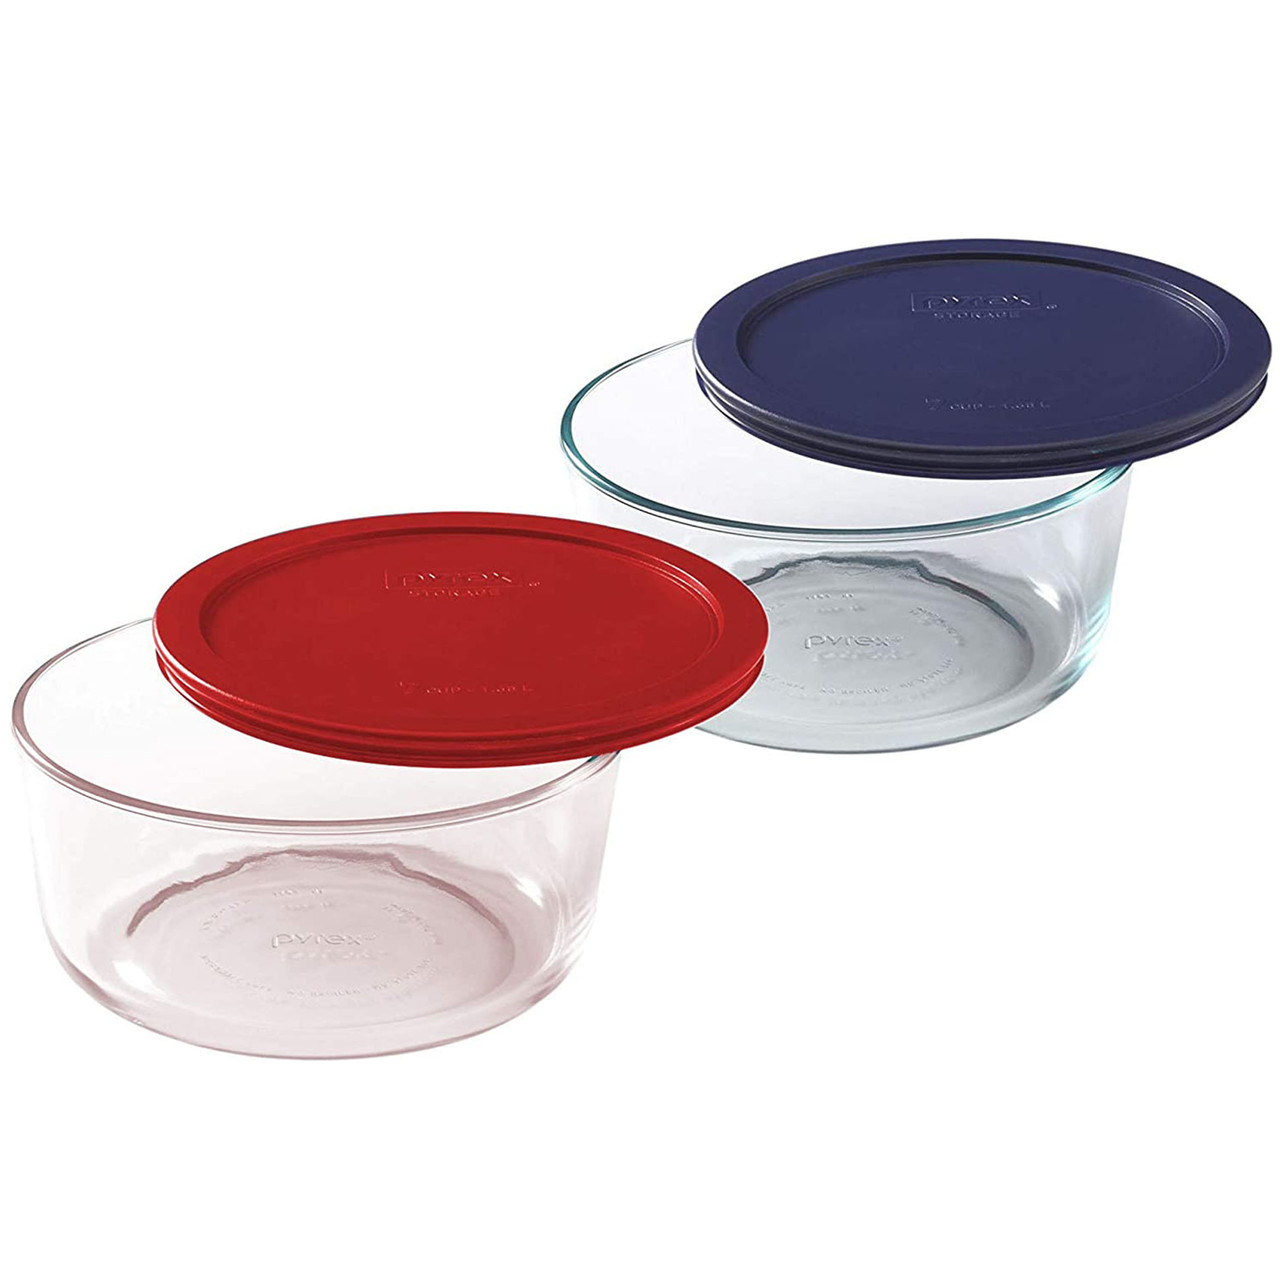 Pyrex Simply Store Glass Storage, 4 Cup